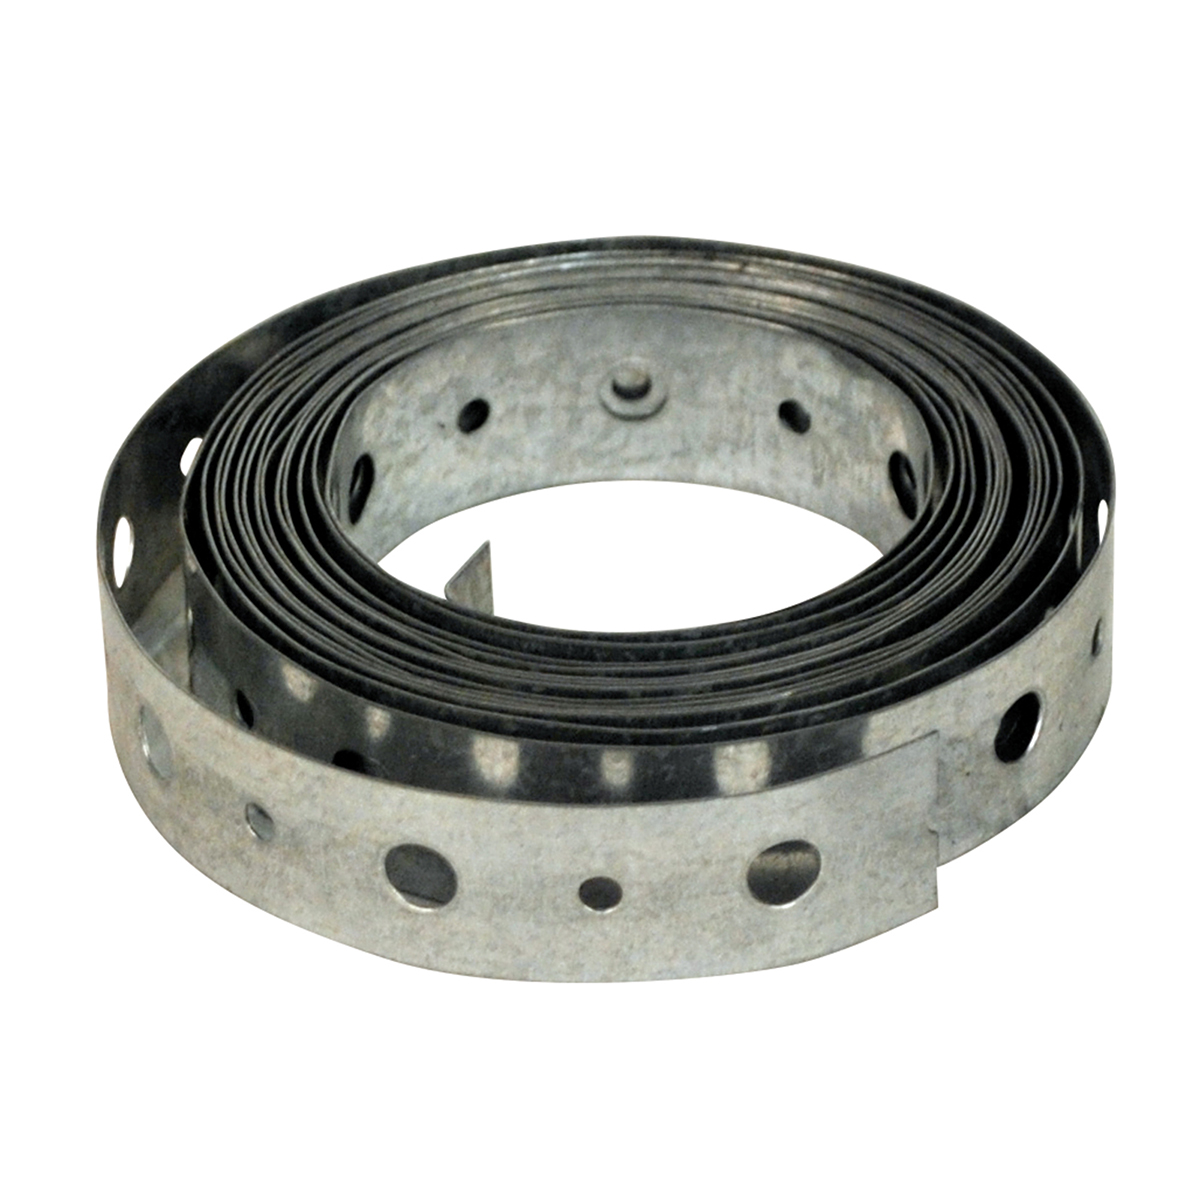 Fits 3/4 in Strap Wd, Aluminum/Galvanized Carbon Steel, Bolt Band Retainer  - 6YRA7